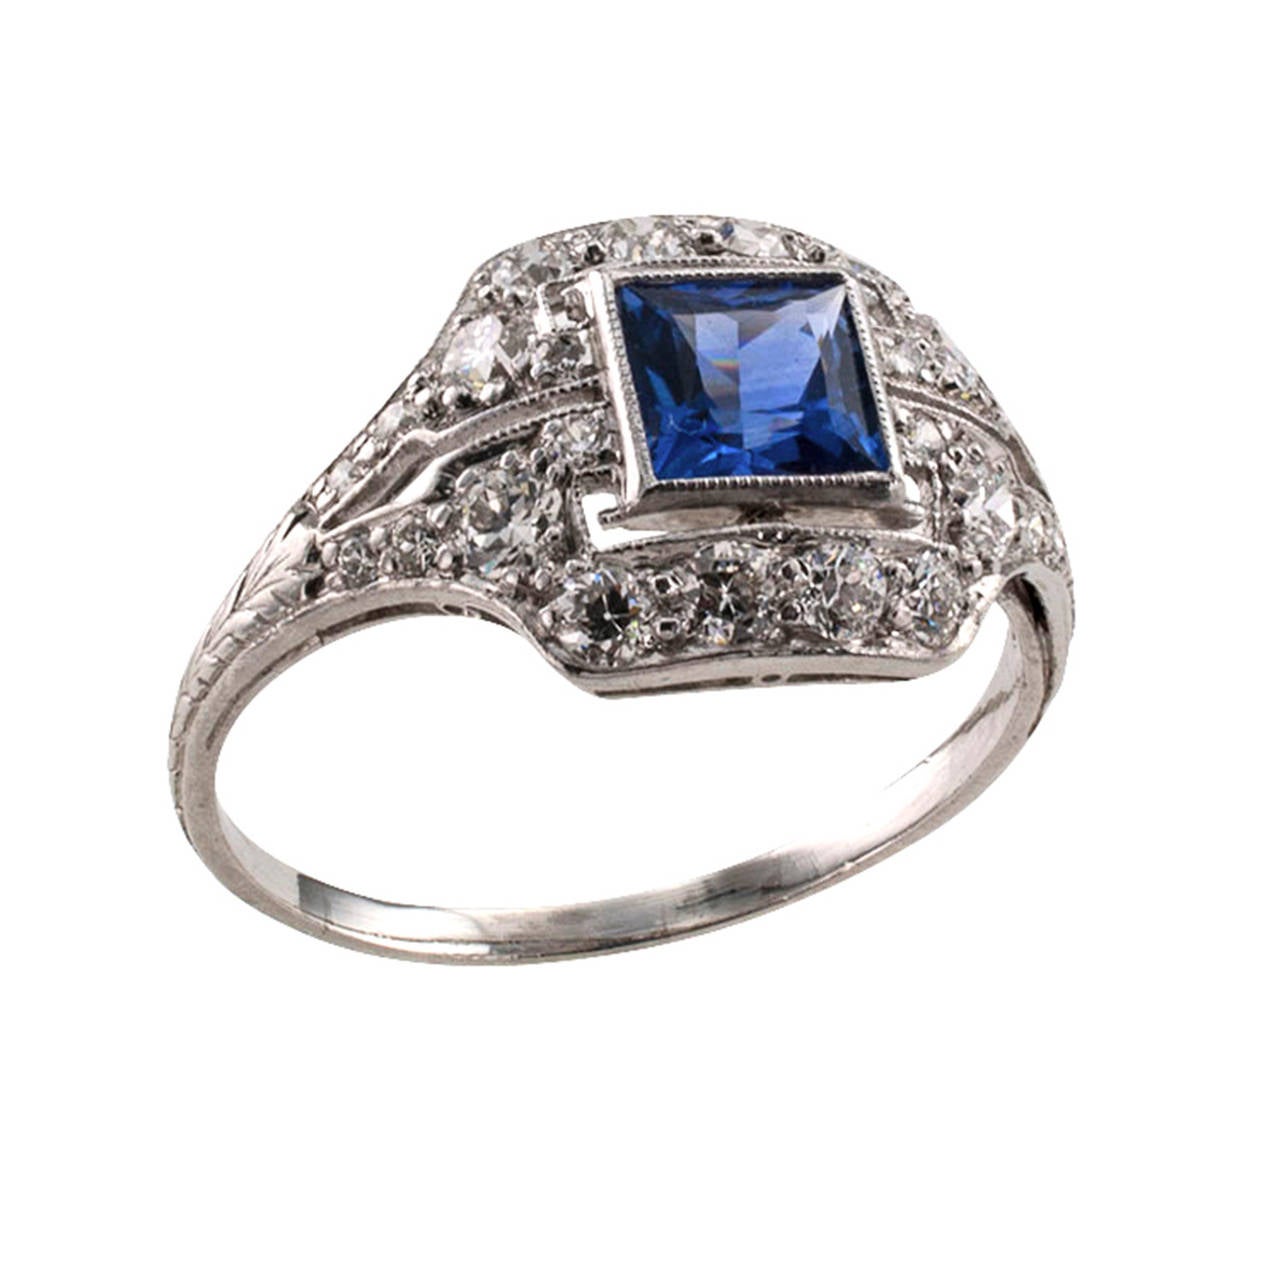 Sapphire and Diamond Art Deco Ring

 This authentic Art Deco jewel, circa 1925, features a square-cut blue sapphire weighing approximately 0.75 carat, bezel-set on a sparkling, slightly domed platinum mount set throughout with smaller round